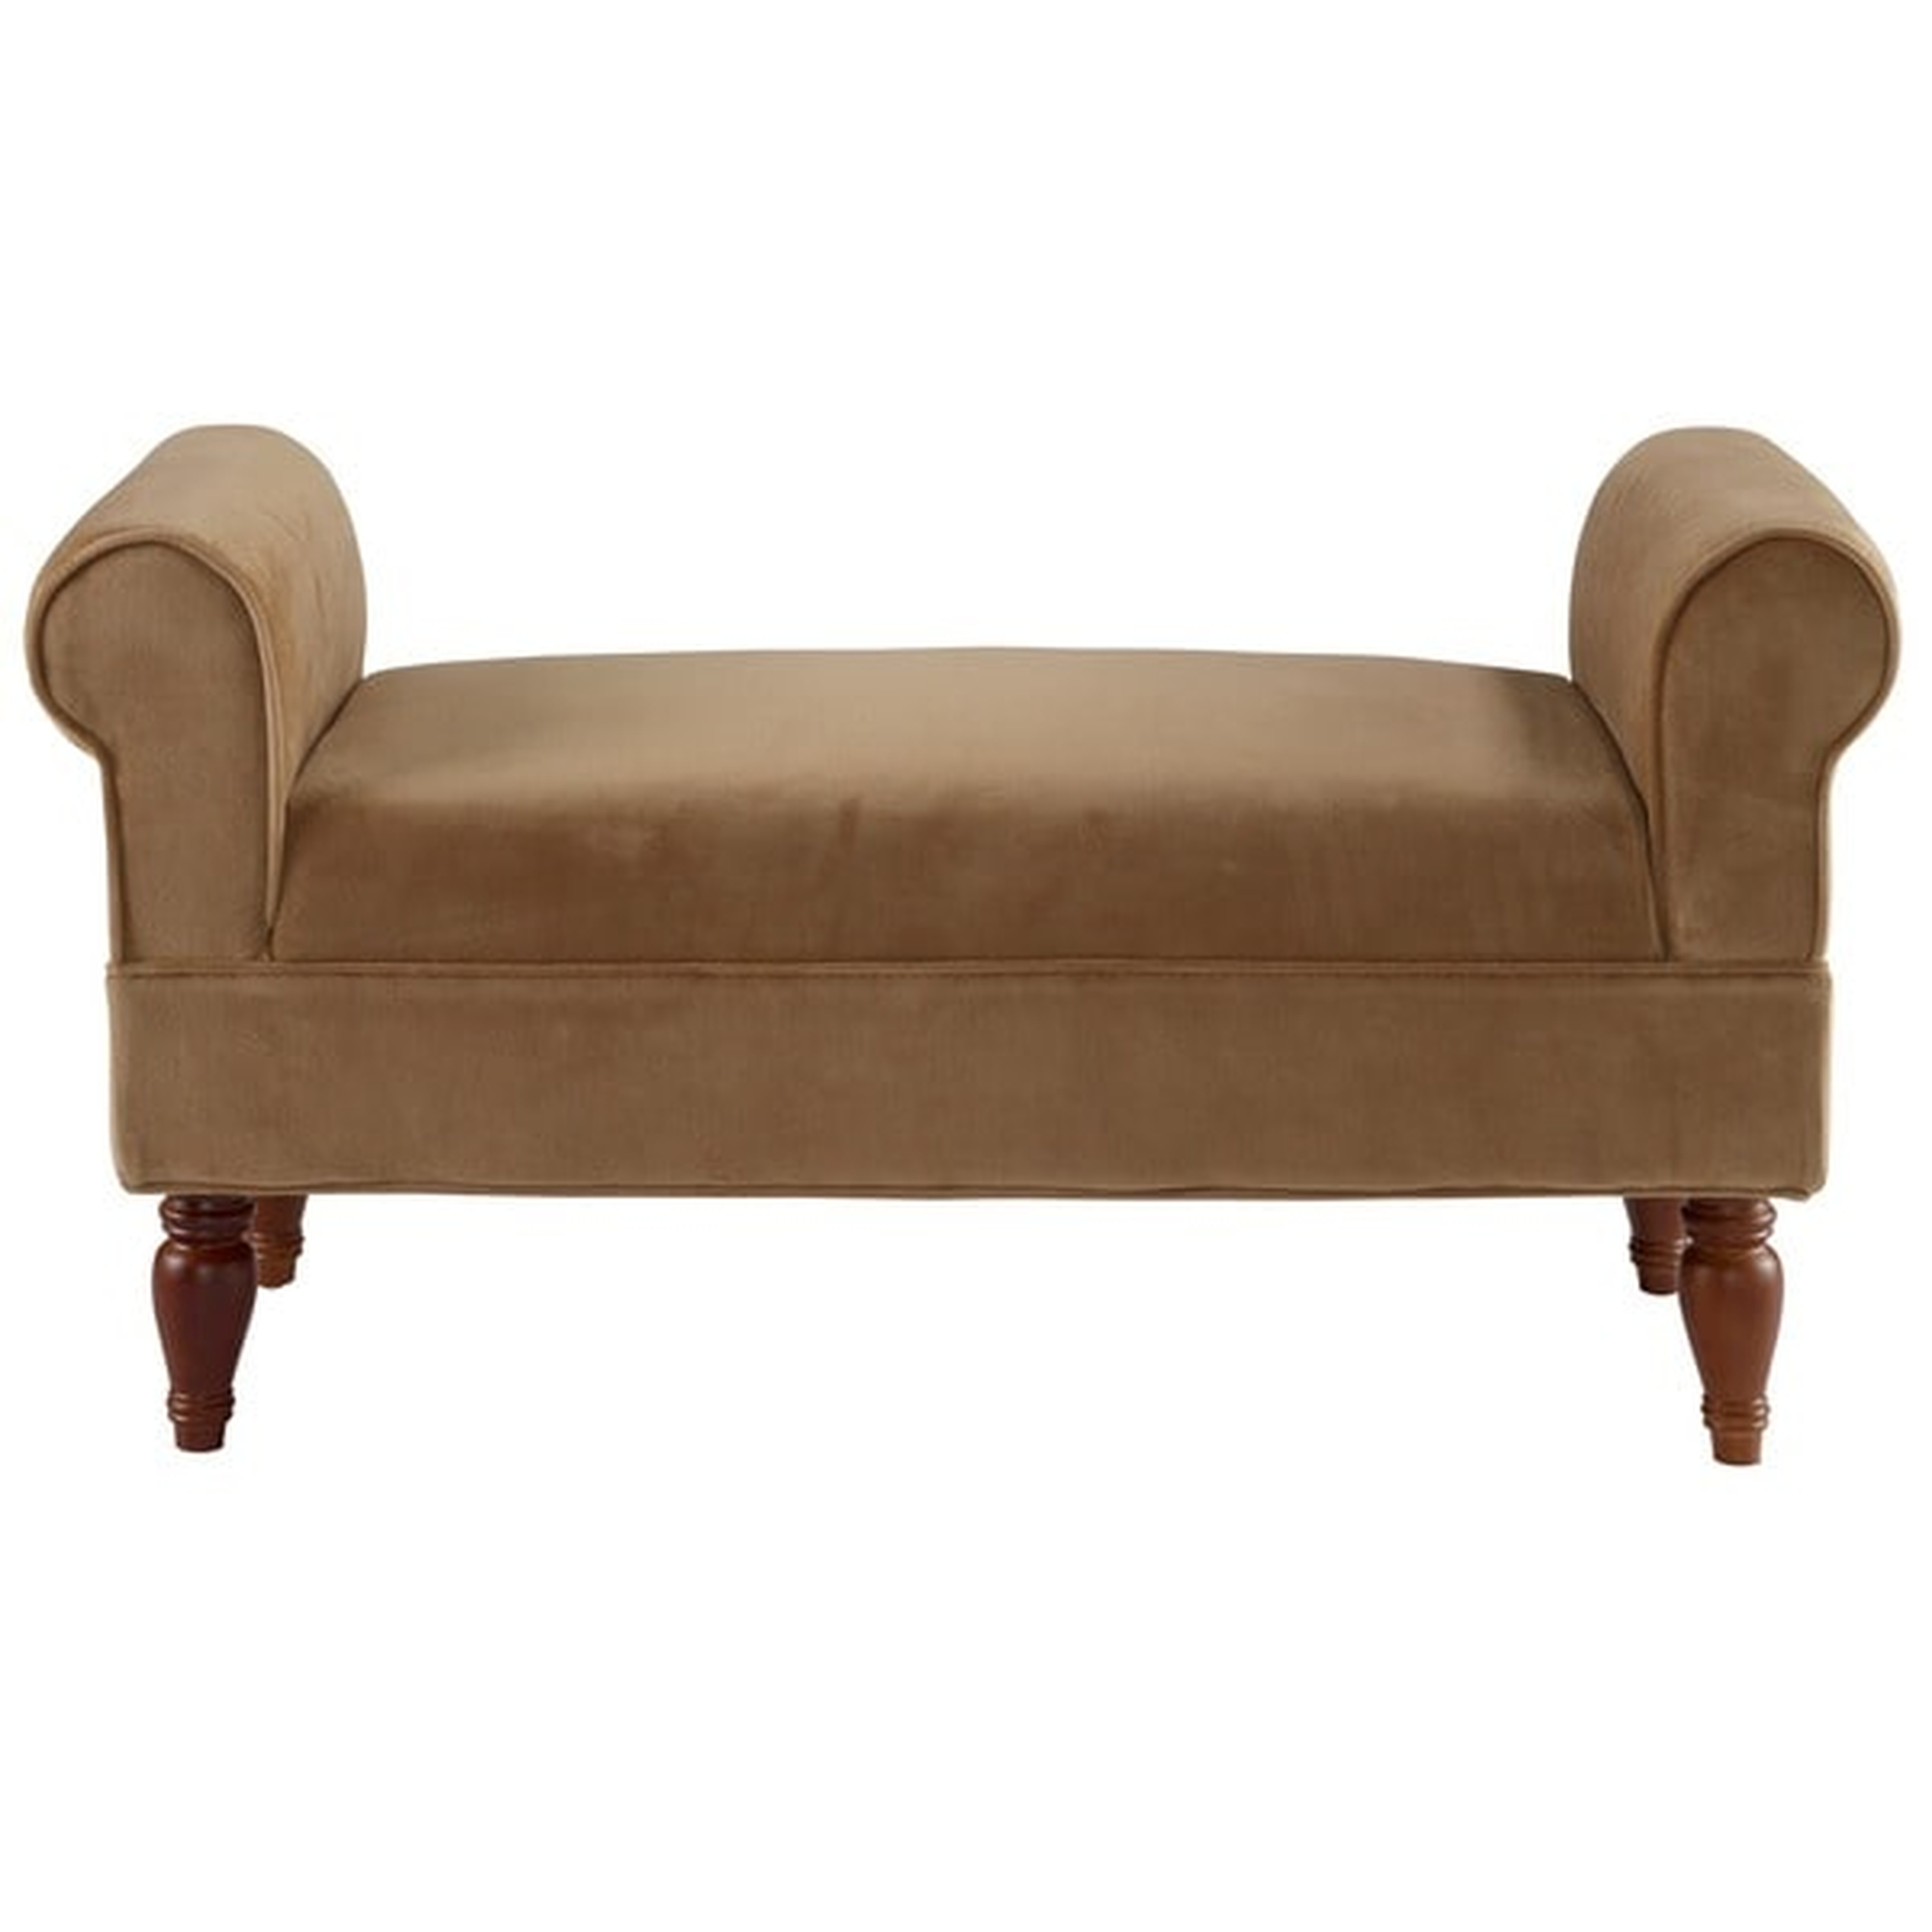 Linon Justine Classic Bench in Light Brown Microfiber - Overstock